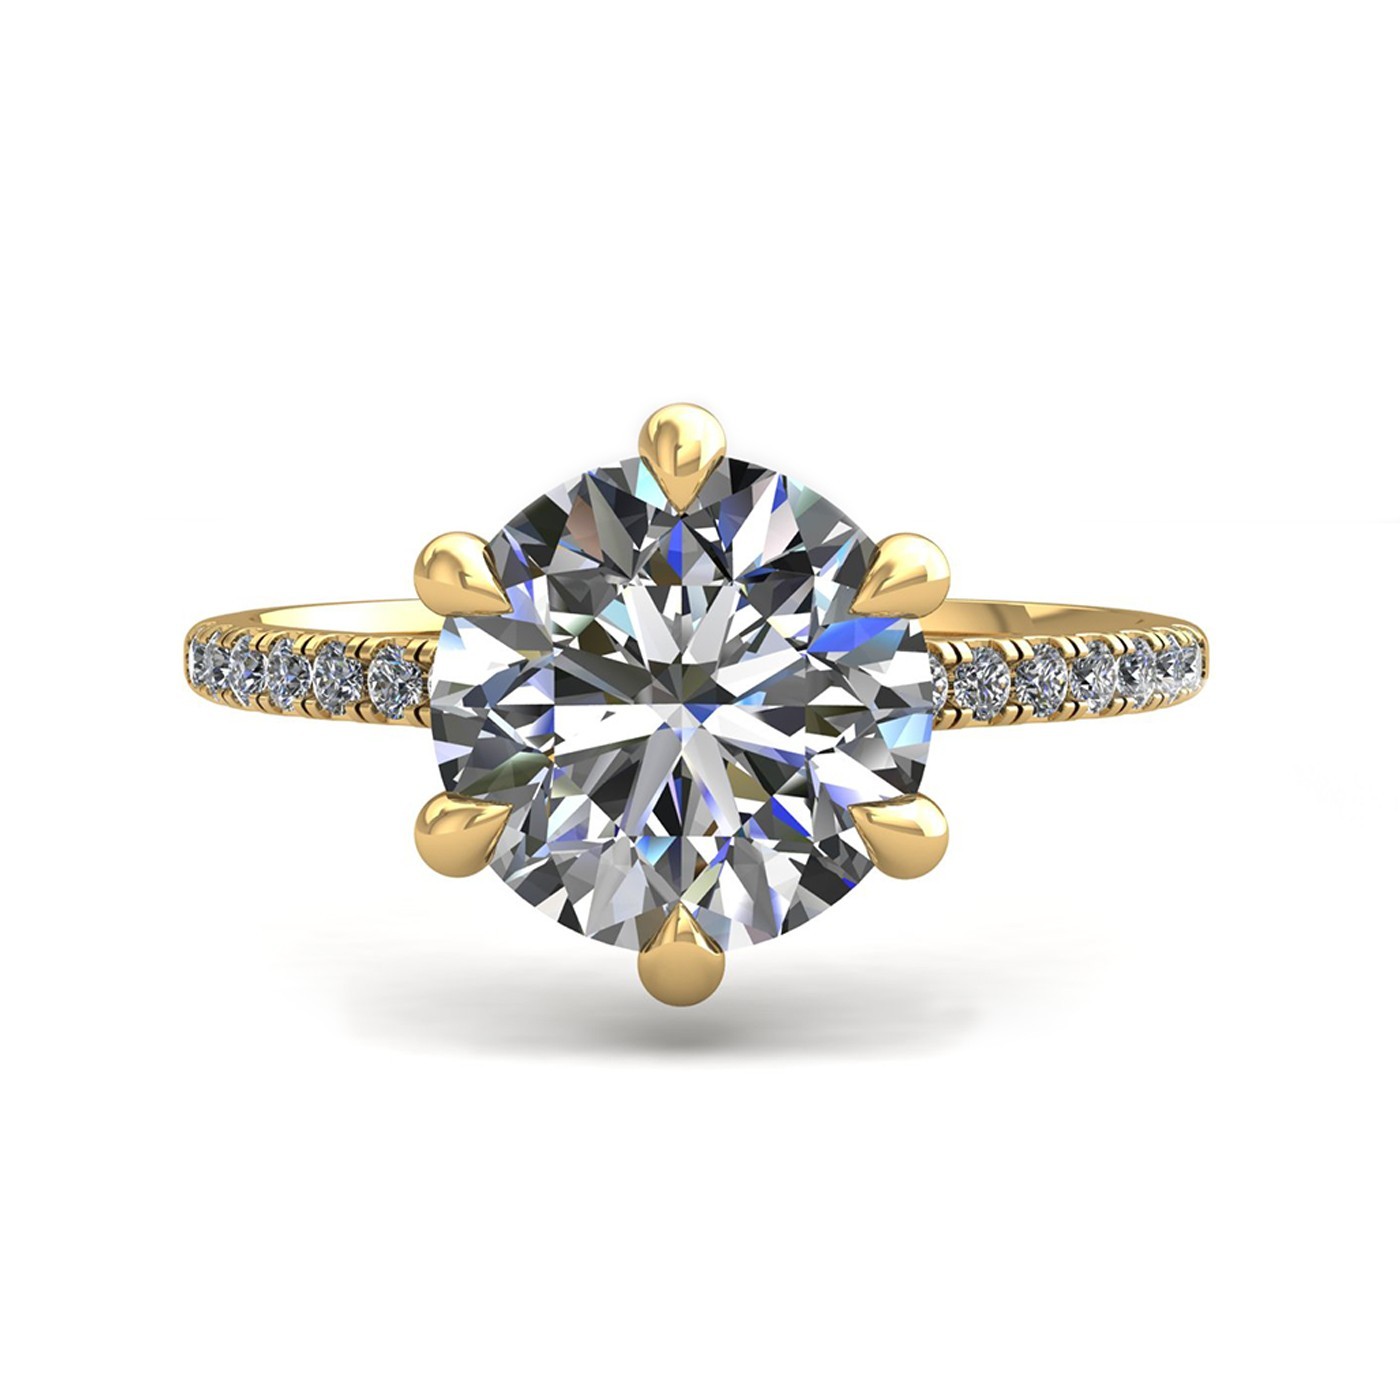 18k yellow gold  0,30 ct 6 prongs round cut diamond engagement ring with whisper thin pavÉ set band Photos & images